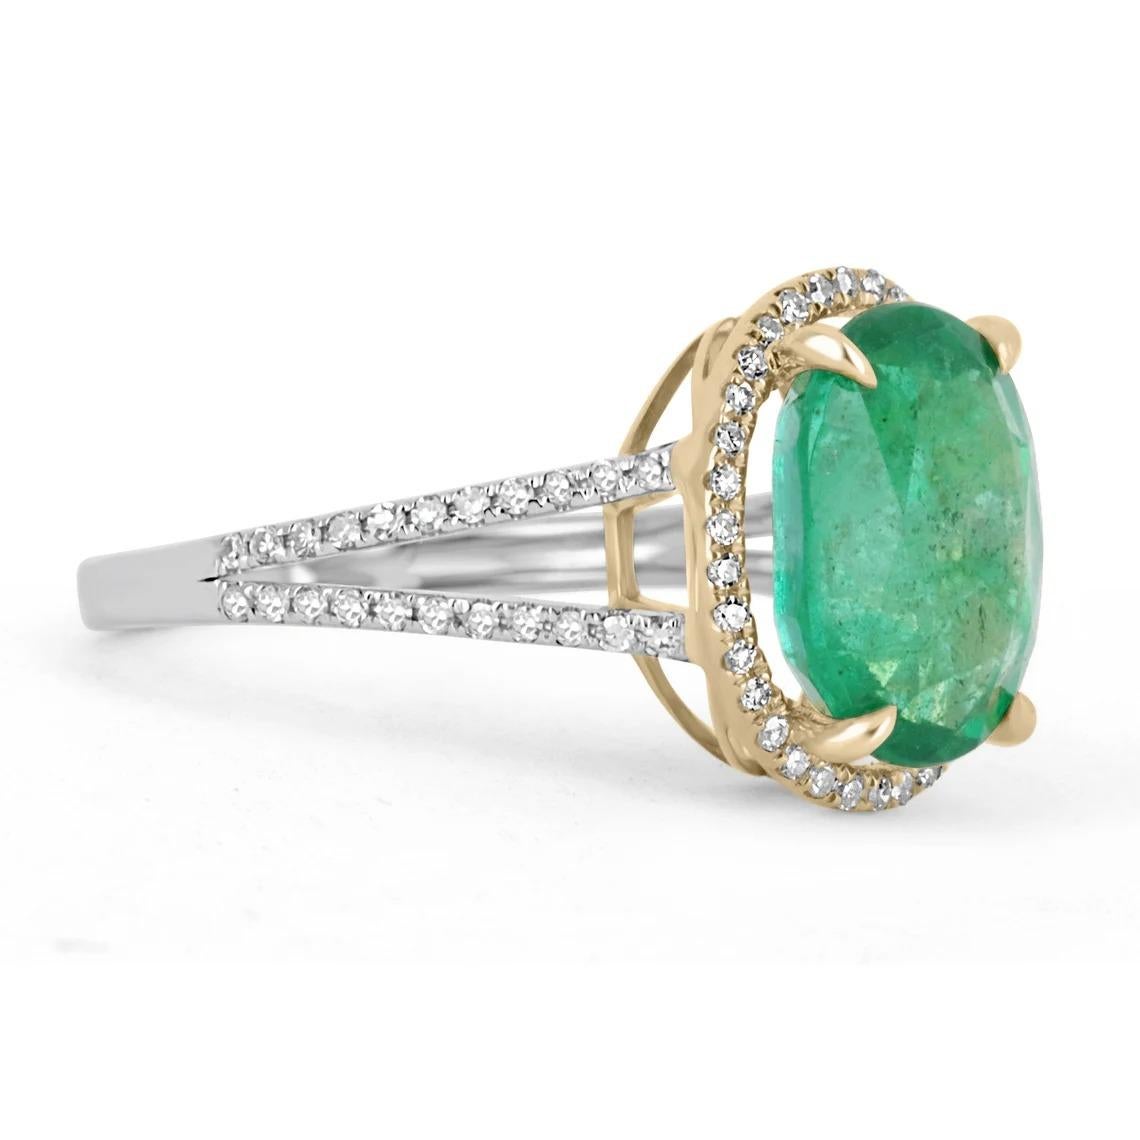 This is an exquisite, natural emerald and diamond halo split shank ring. The gorgeous setting lets sit an excellent quality emerald with beautiful color and very good eye clarity. The emerald is not perfect and small imperfections do exist as it is